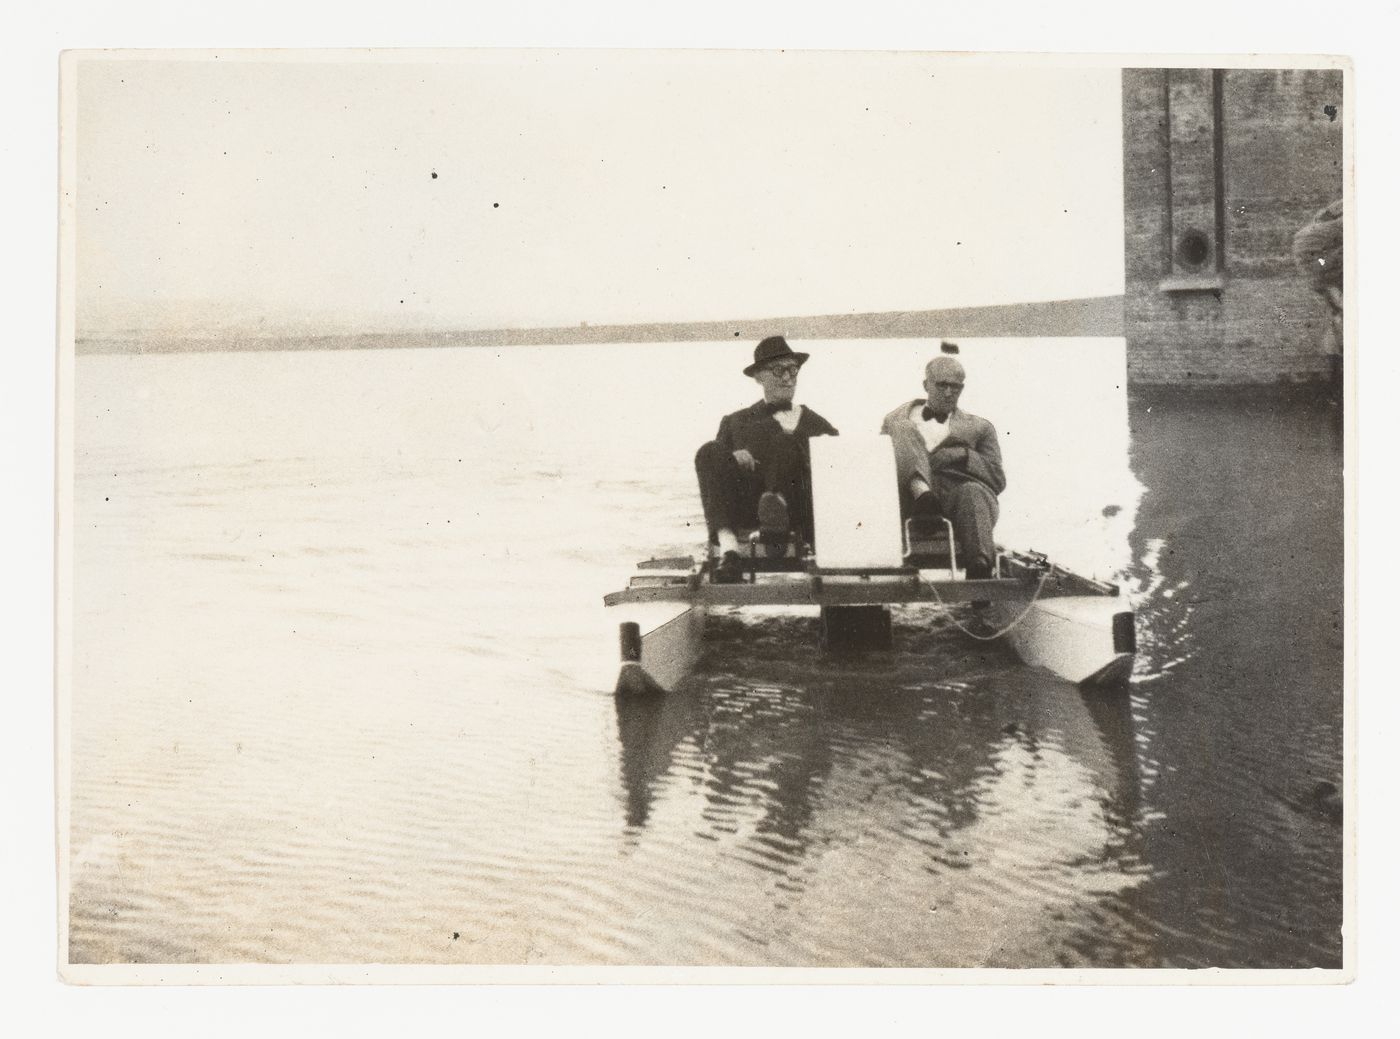 Le Corbusier and Pierre Jeanneret at Sukhna Lake, Chandigarh, India